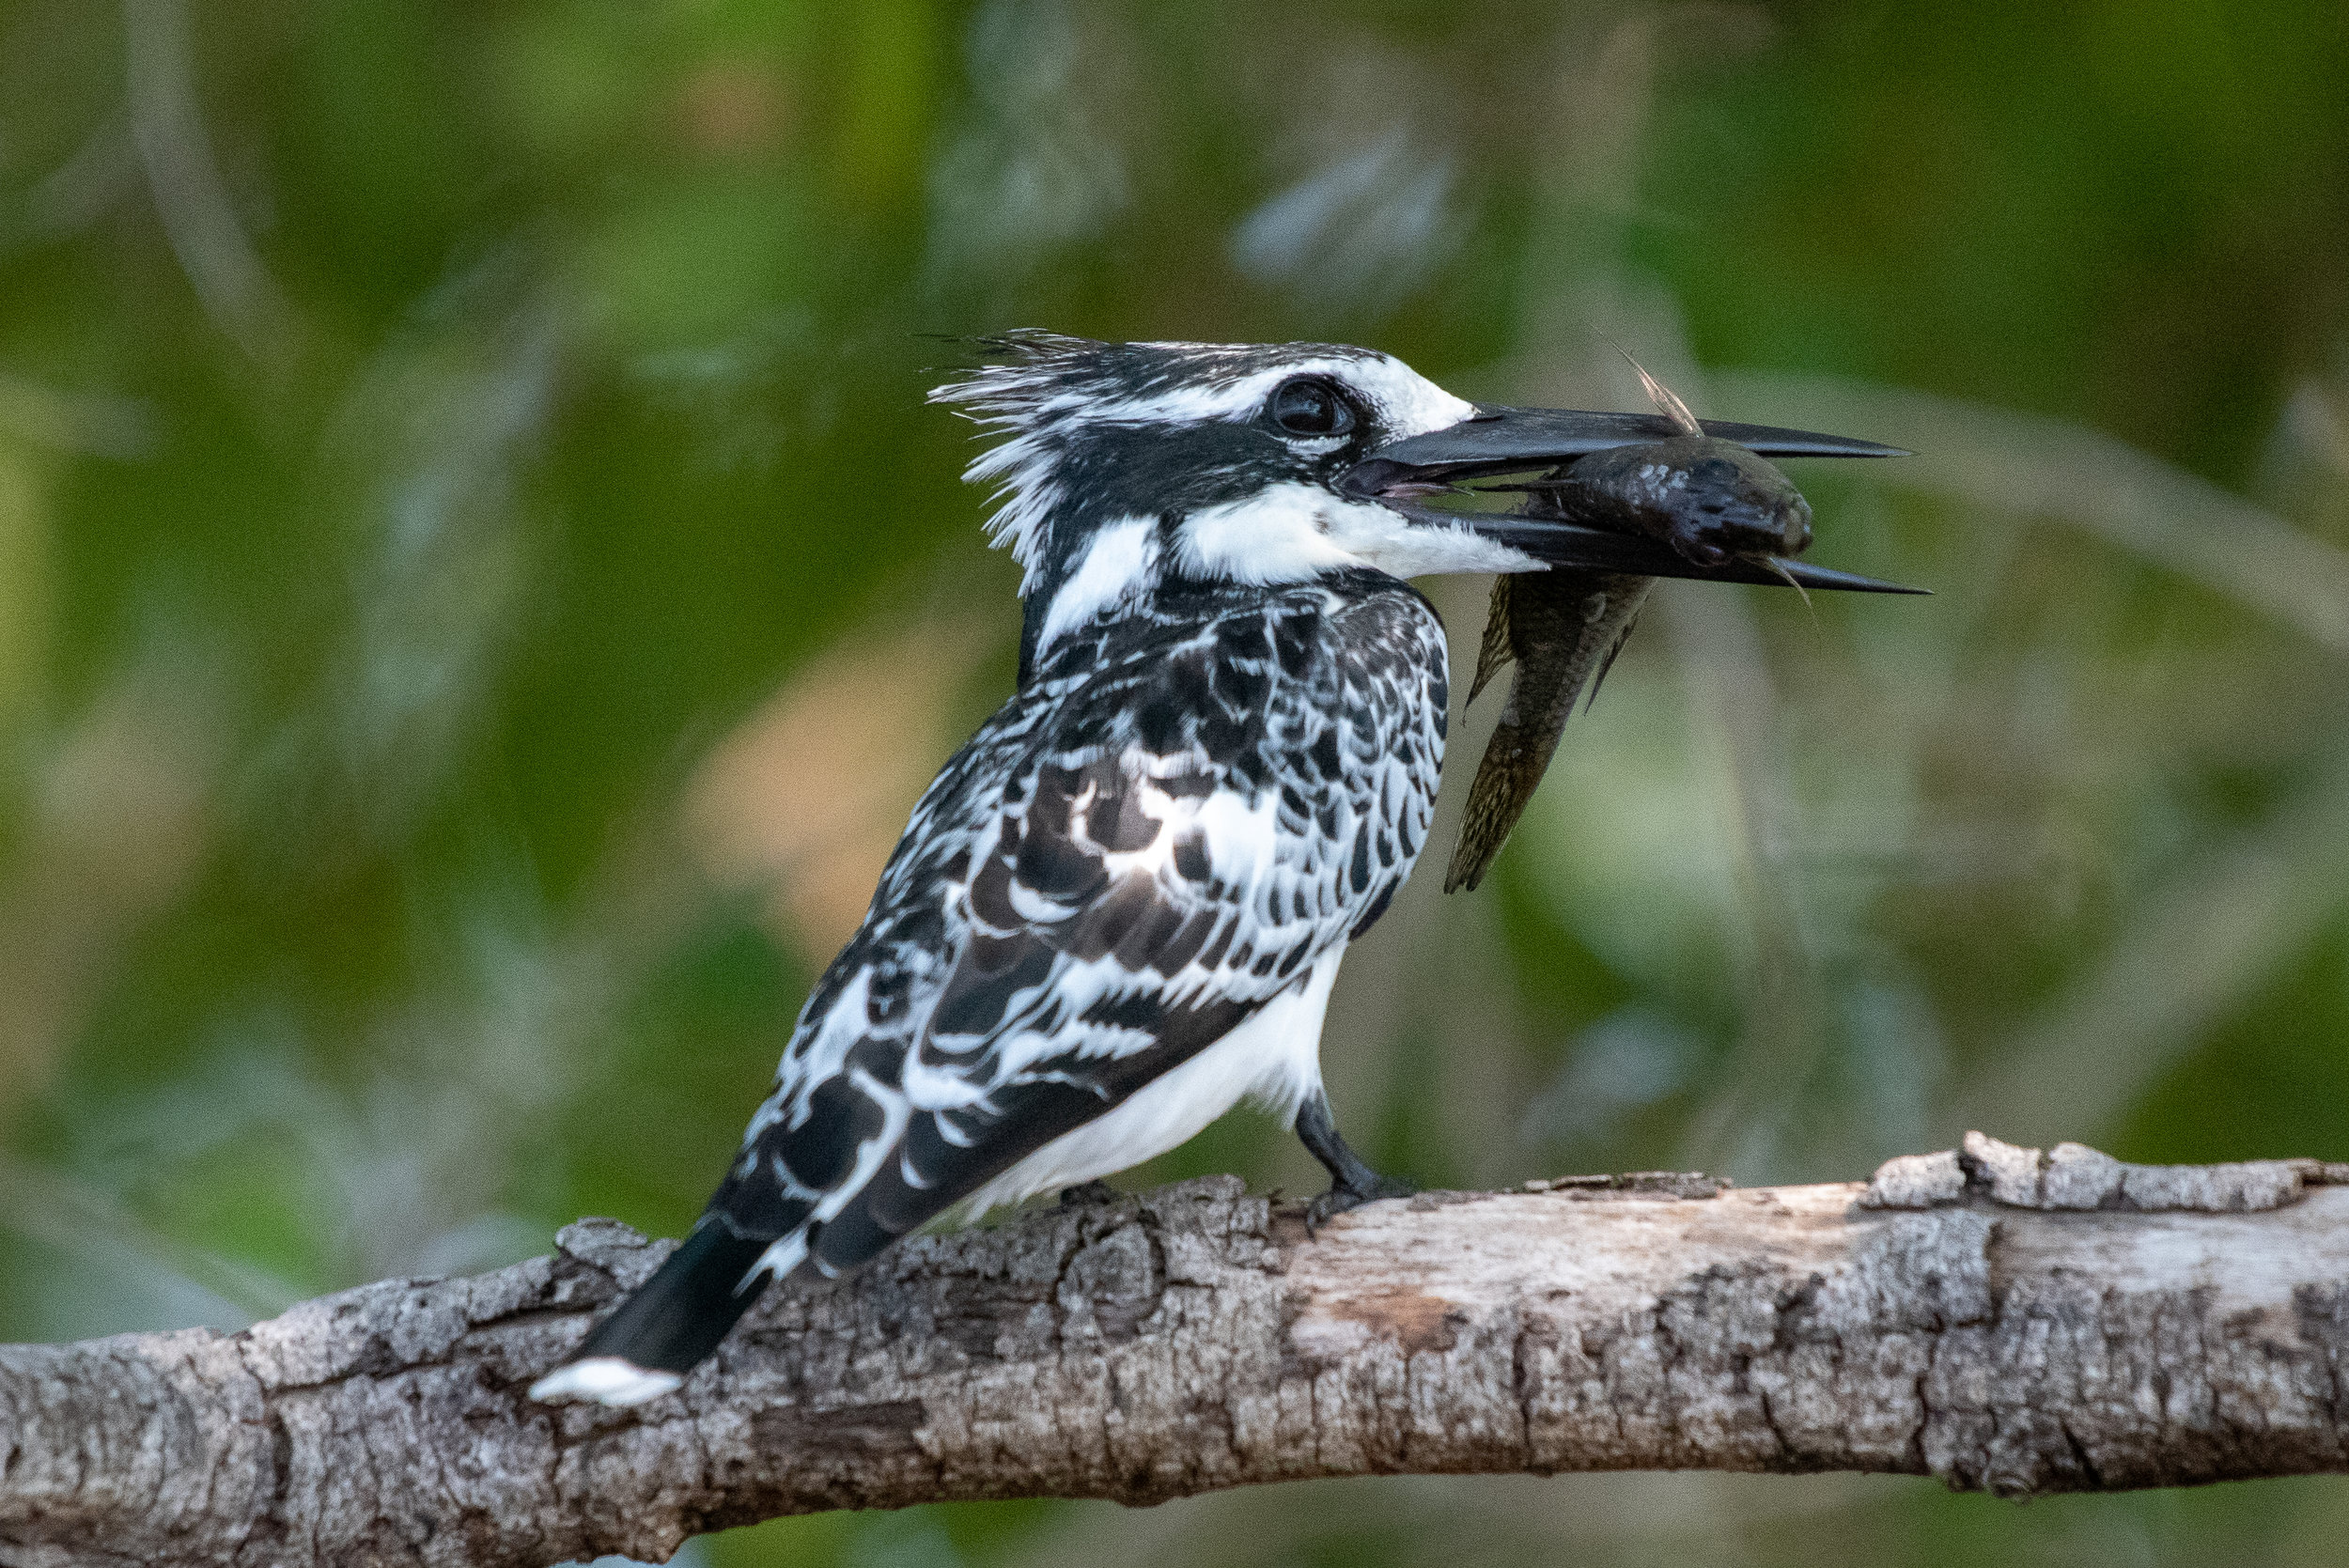 Pied kingfisher with black bream, Chobe River, Namibia